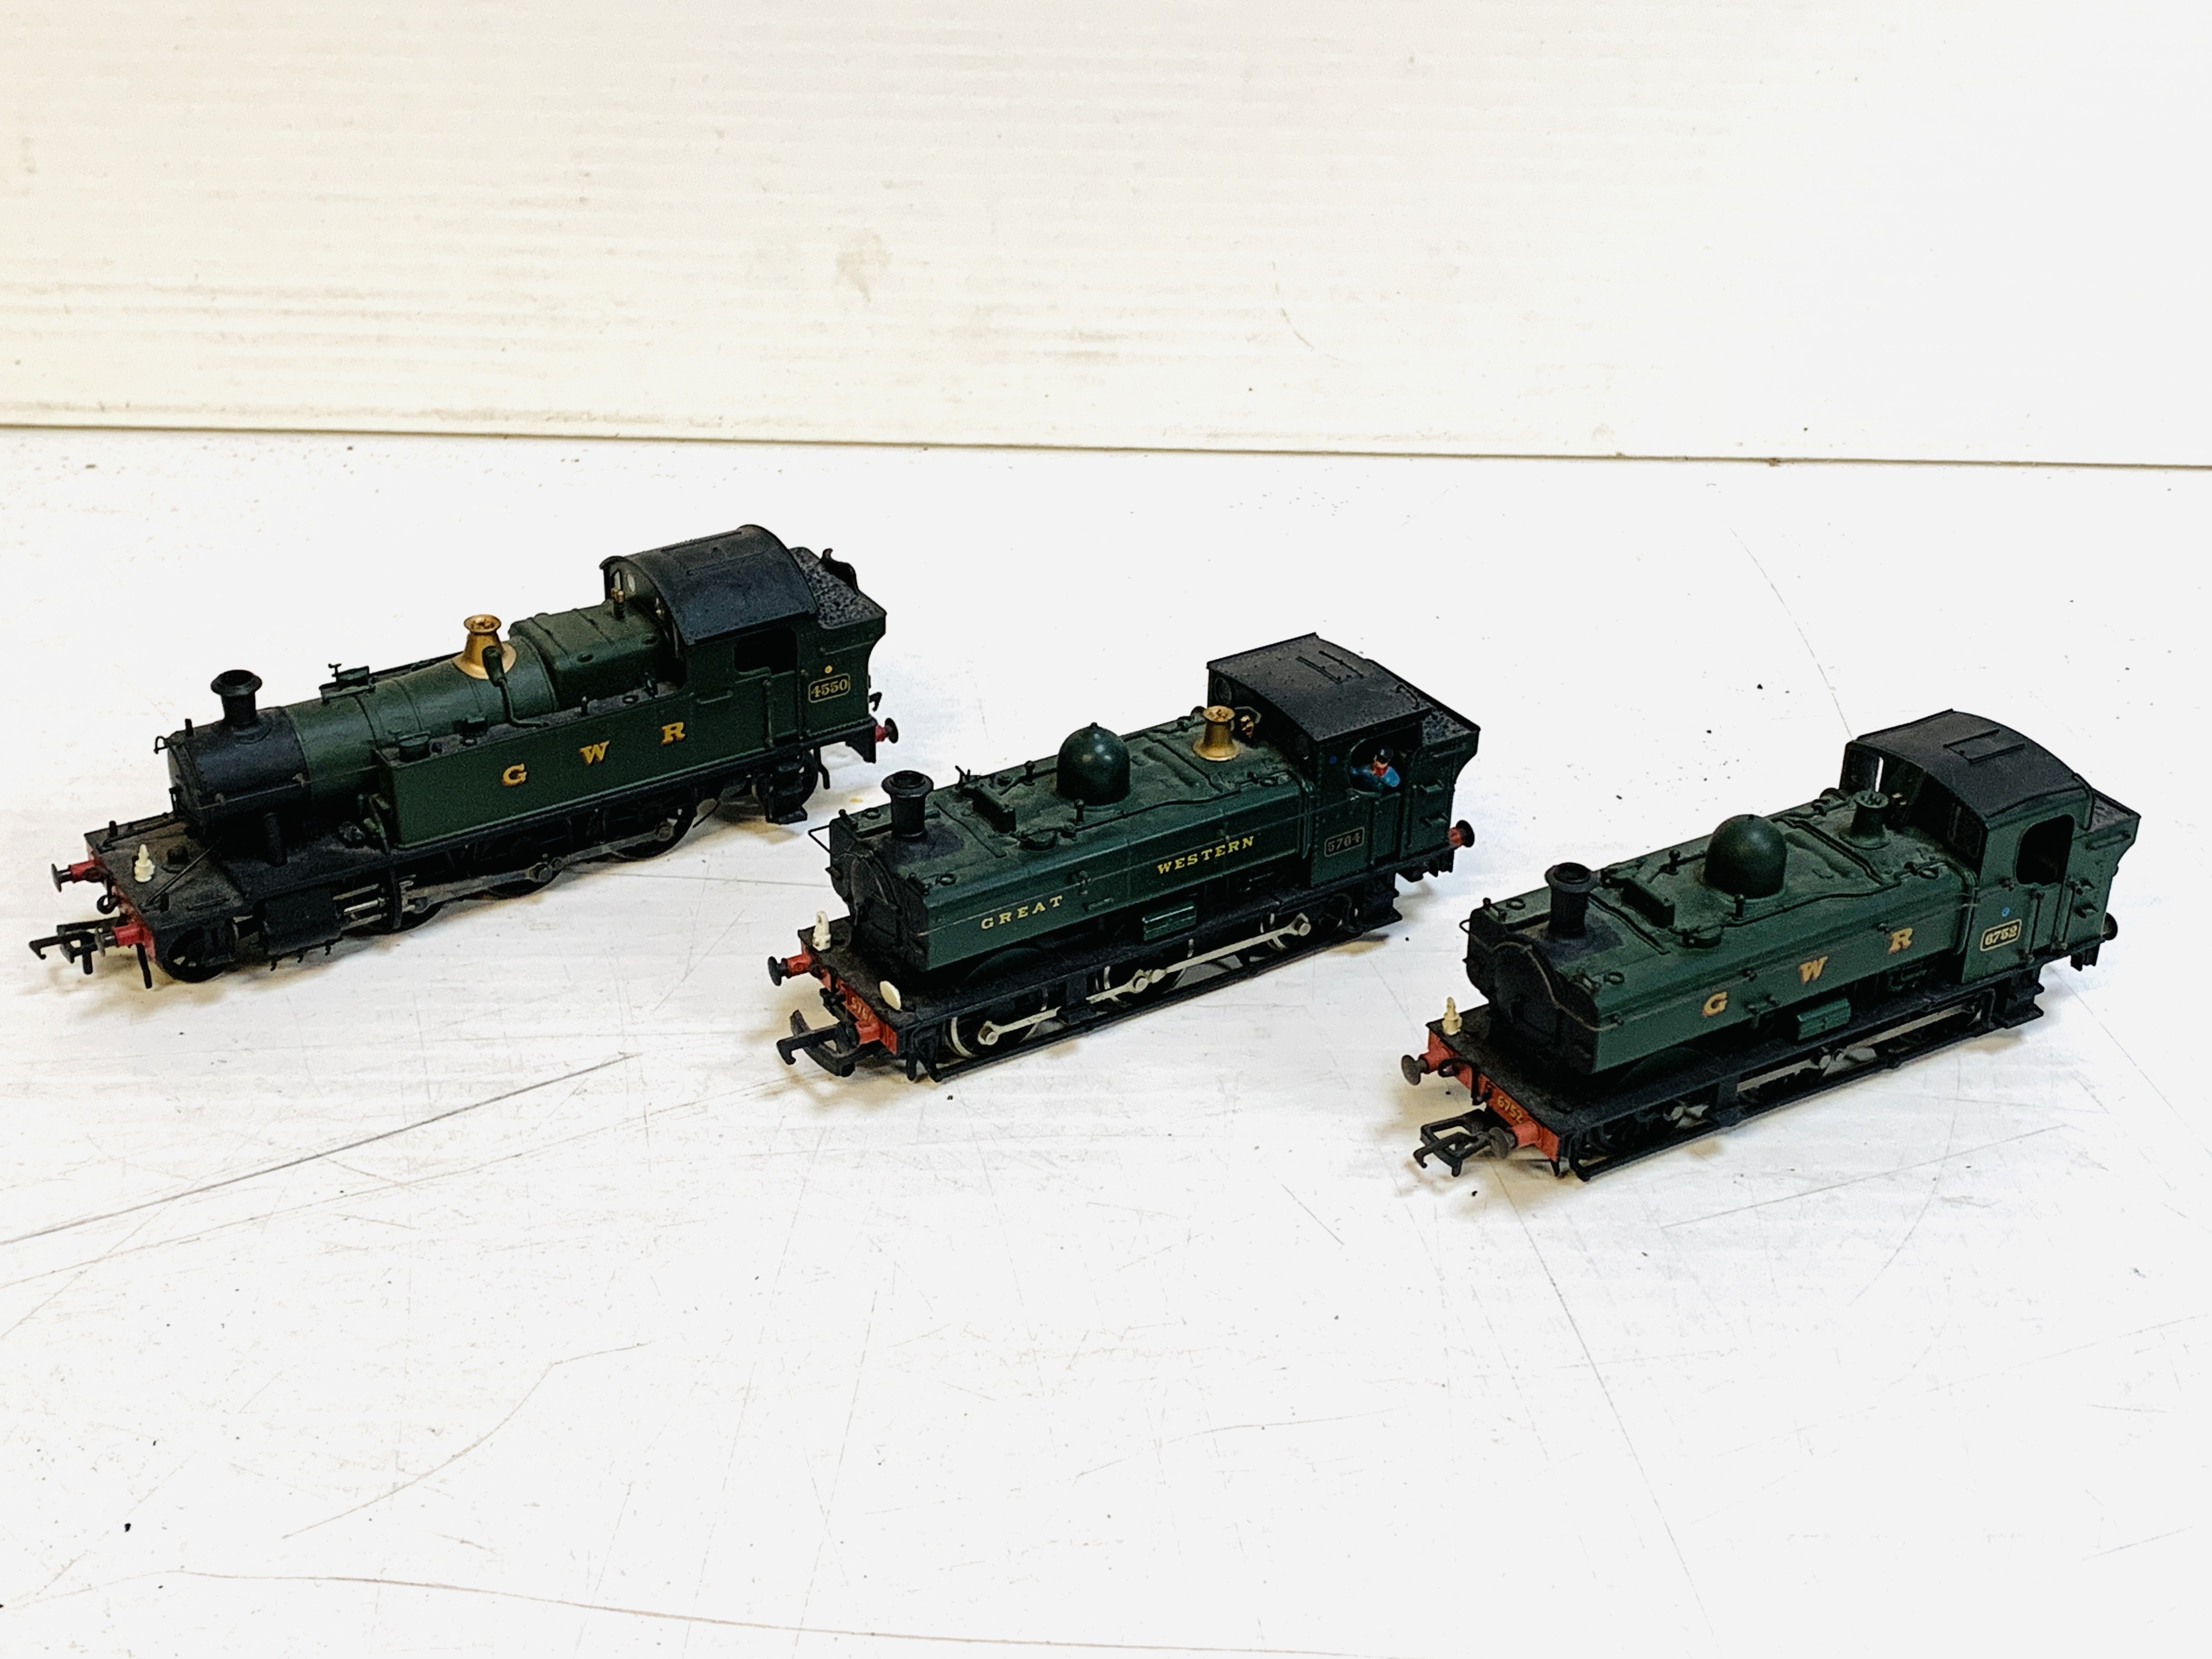 A Bachmann model tank engine and two other tank engines